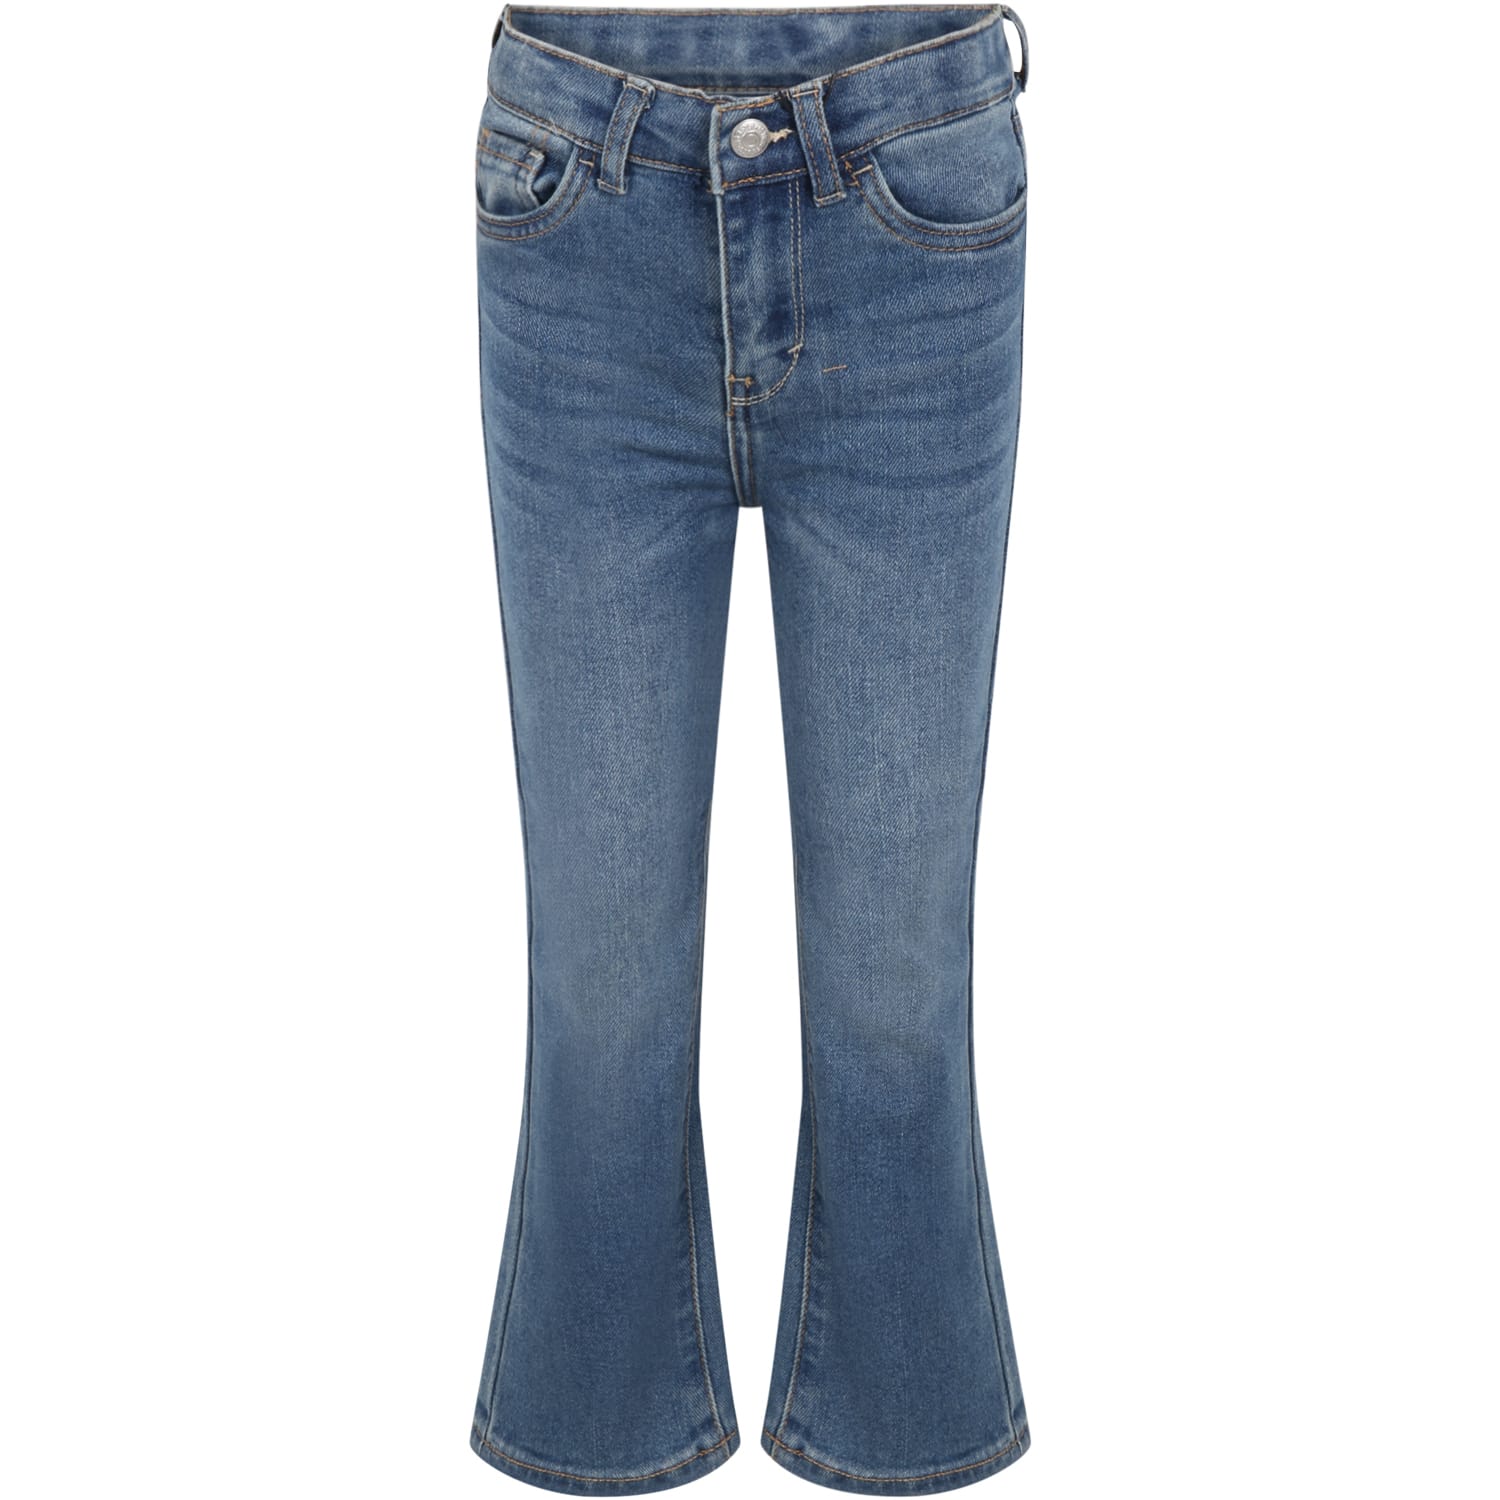 Levi's Blue Jeans For Girl